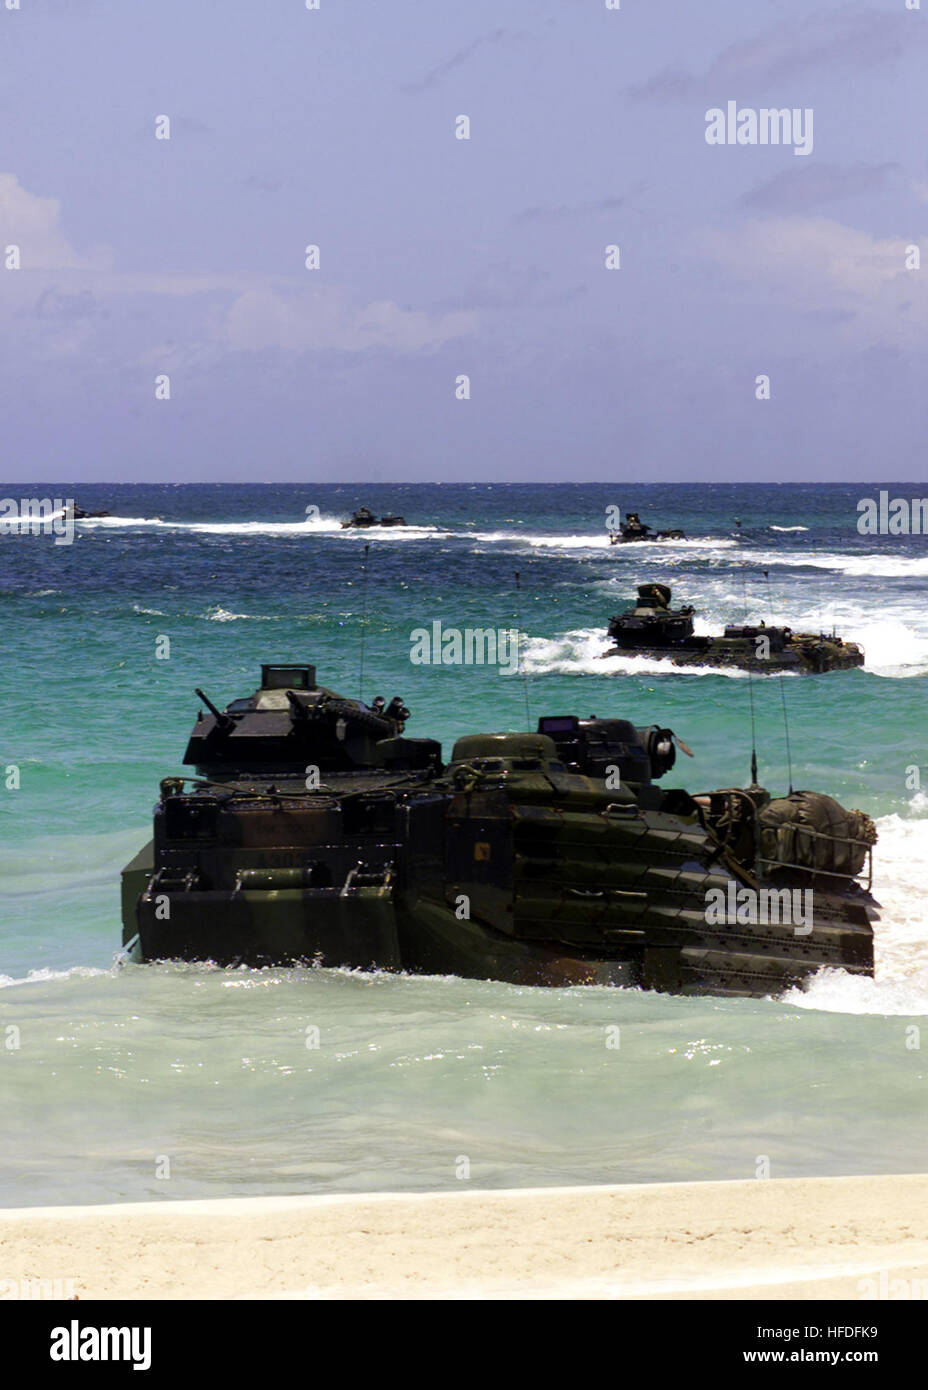 010806-N-6141B-502 Vieques Island, Puerto Rico (Aug. 6. 2001) -- Armored Amphibious Vehicles (AAV) land on Blue Beach Vieques.  The Kilo Company, Battalion Landing Team 3-6 AAVs and personnel are home-based out of Camp Lejeune, N.C. and participating in Supporting Arms Coordination Exercise designed to provide advanced level training for Marine forces. U.S. Navy photo by Journalist Senior Chief Alan Baribeau.  (RELEASED) US Navy 010806-N-6141B-502 Armored Amphibious Vehicles (AAV) land on Blue Beach Vieques Stock Photo